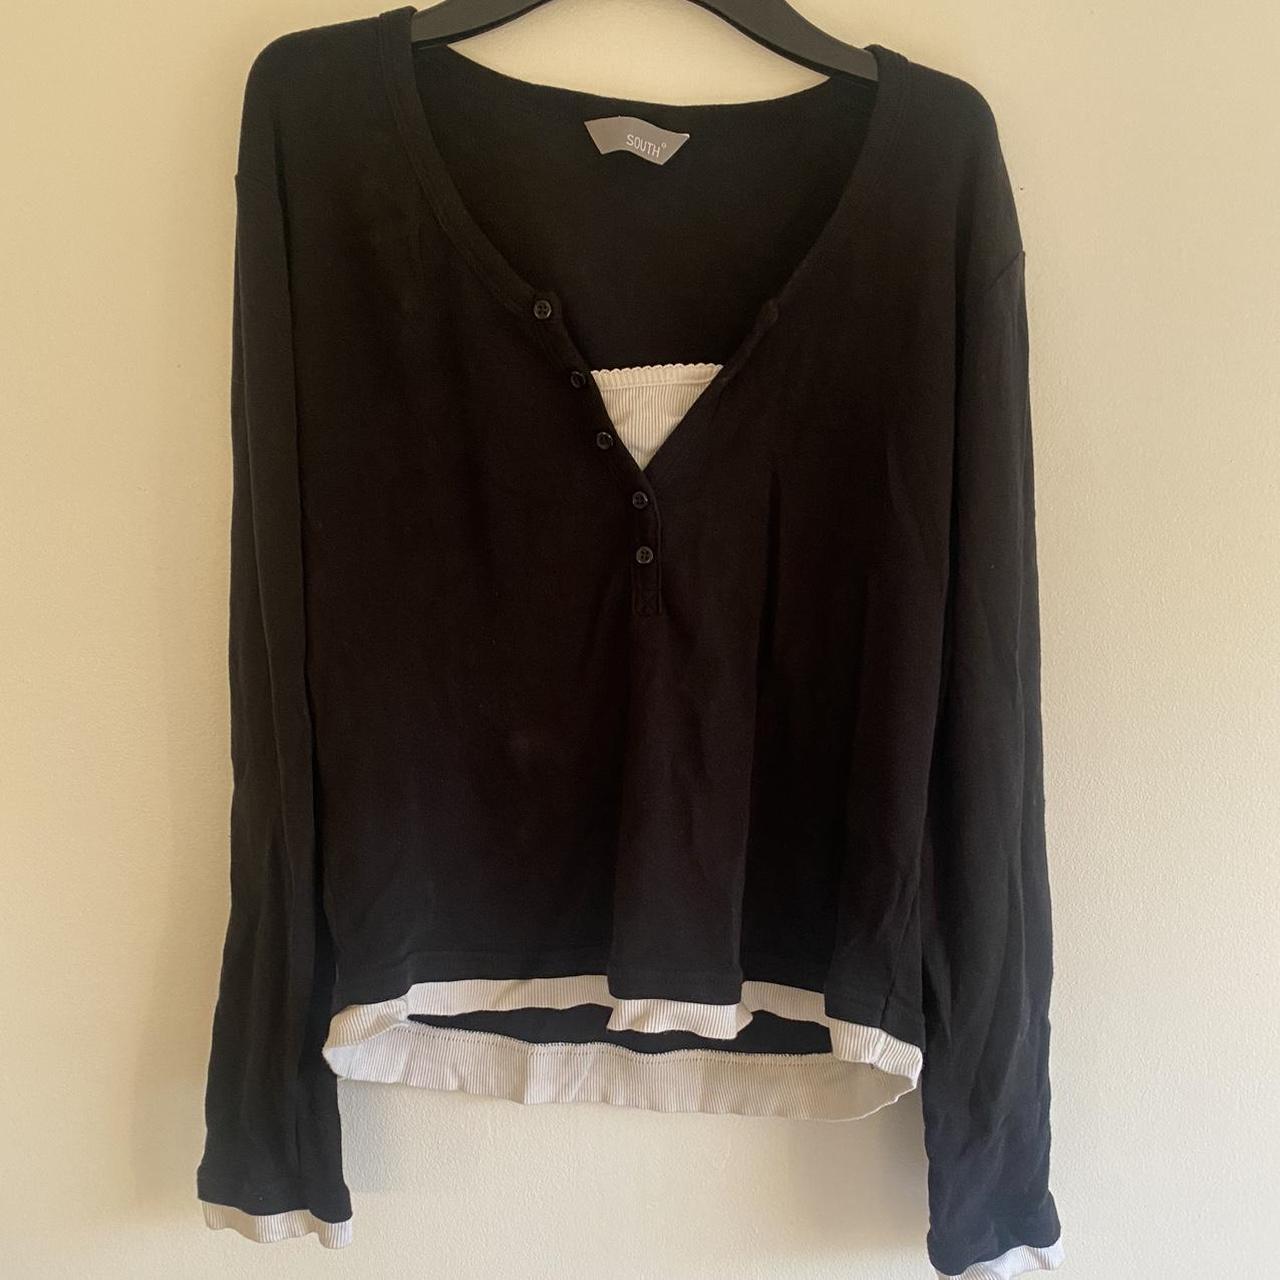 Vintage black and white long sleeve top with button... - Depop